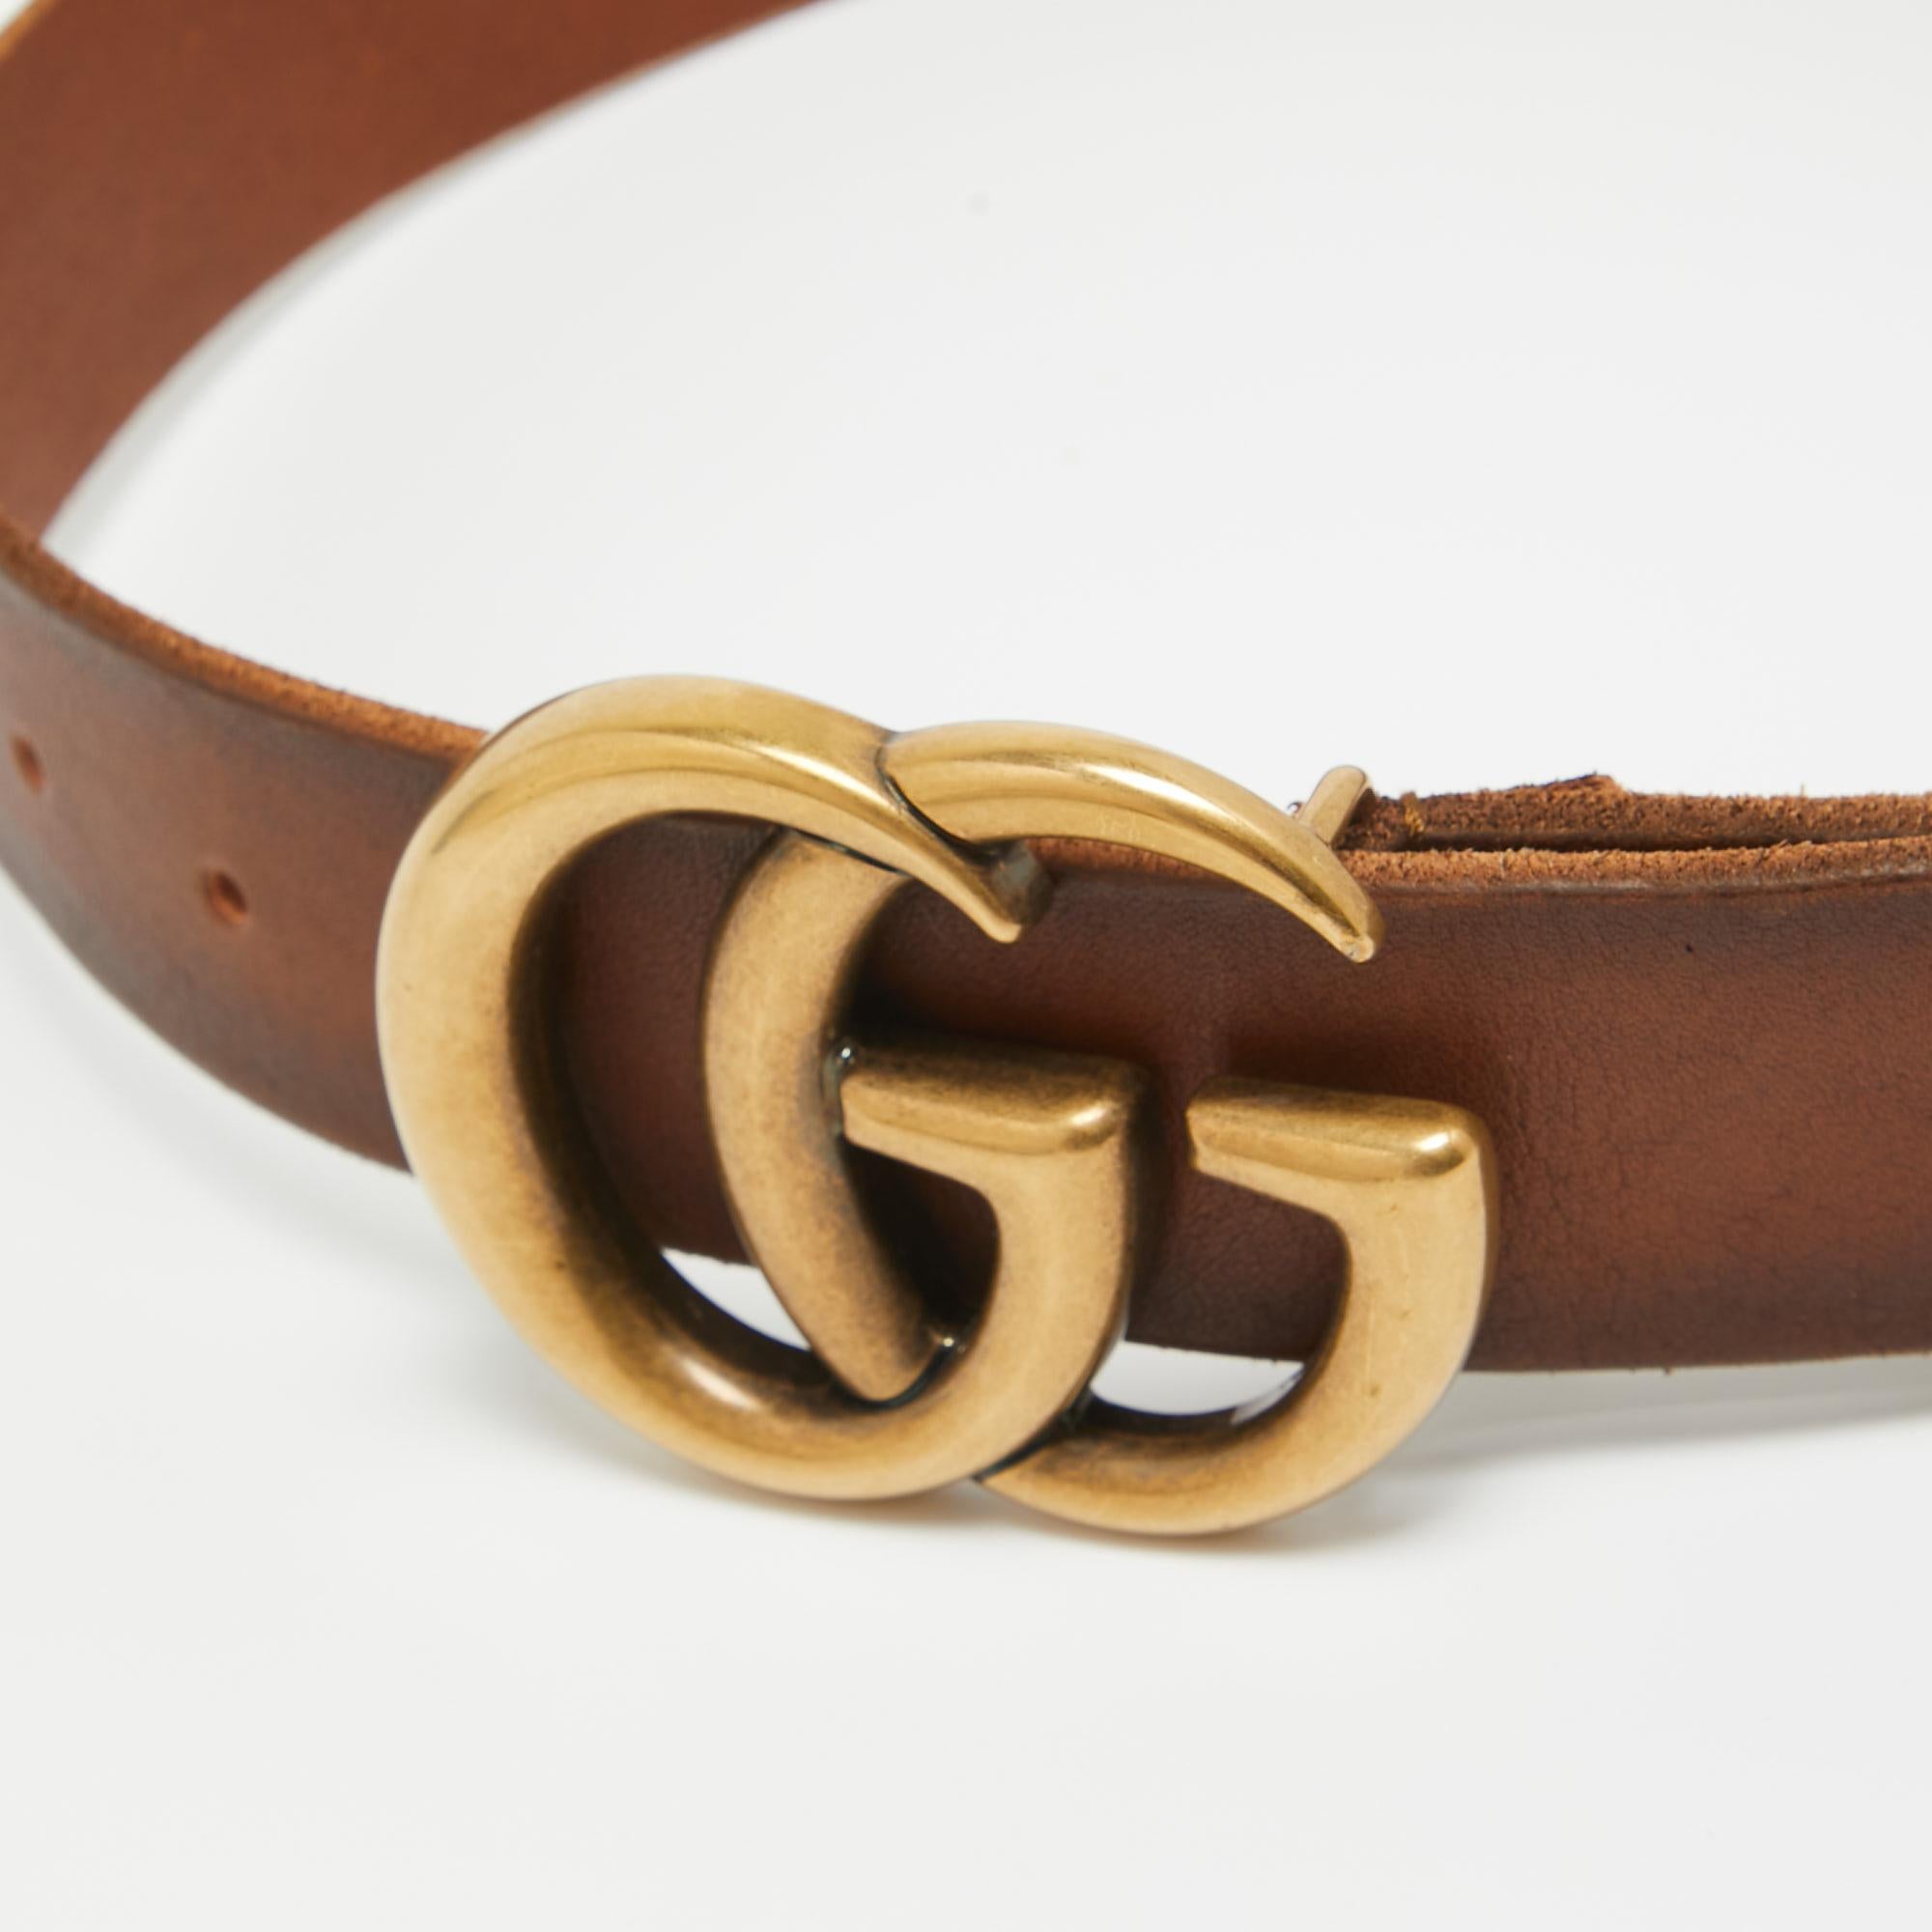 Belts are always a good option to add to your collection. Take your styling game a level up with this belt from Gucci. It is crafted from leather, and it has a double G buckle.

